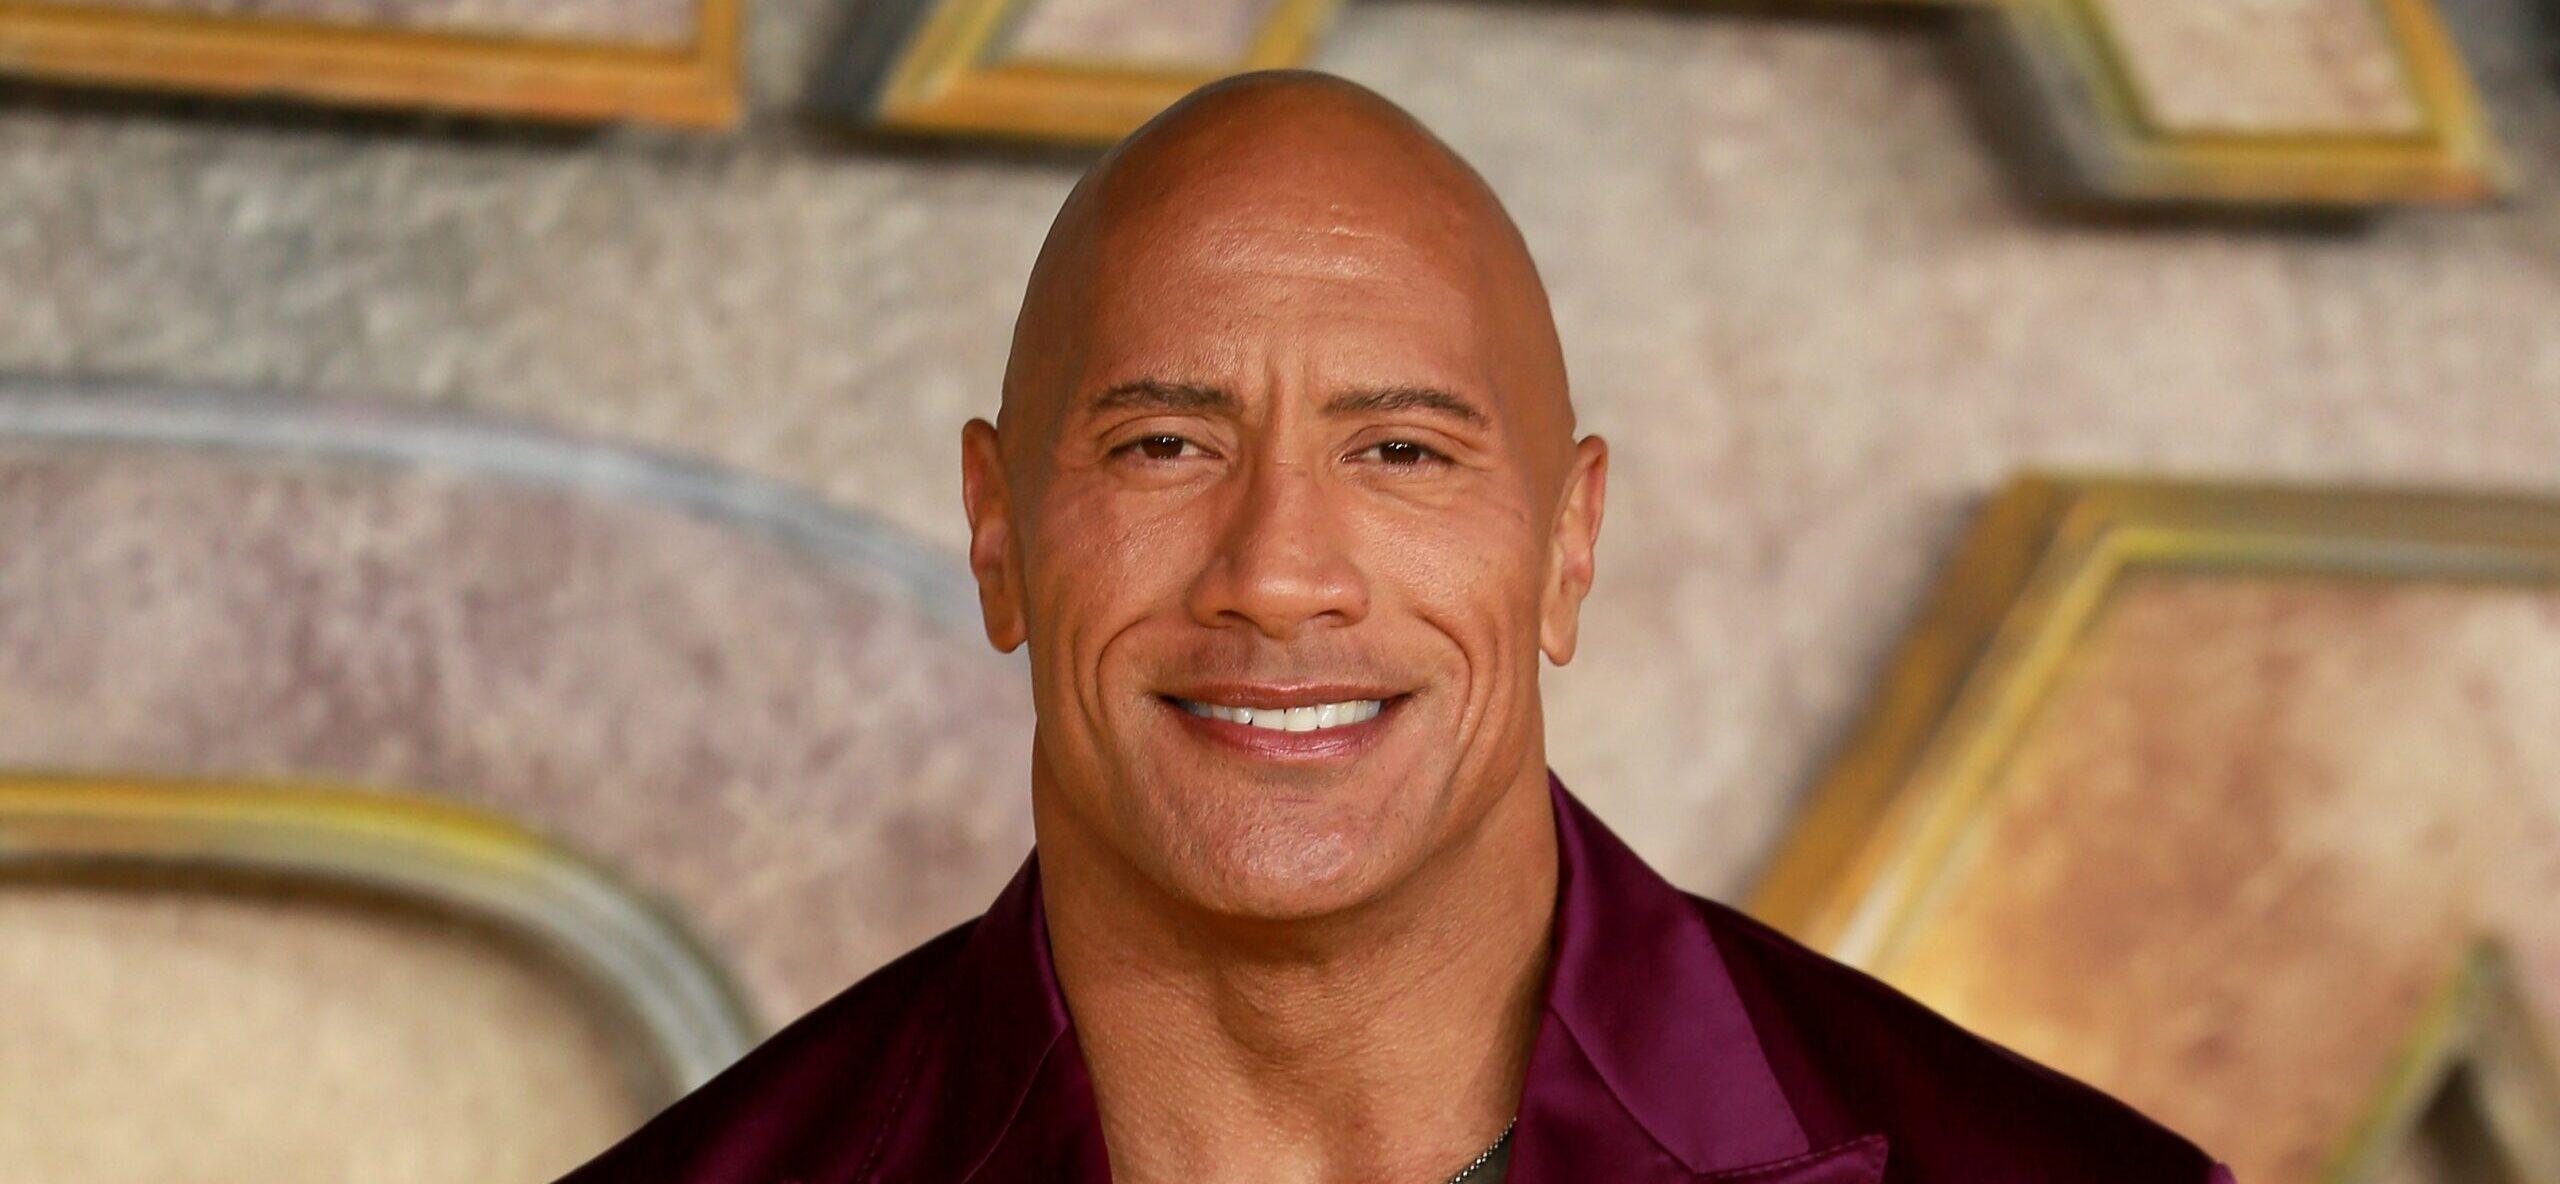 Dwayne Johnson Shuts Down ‘False Clickbait Garbage’ About The People’s Fund of Maui